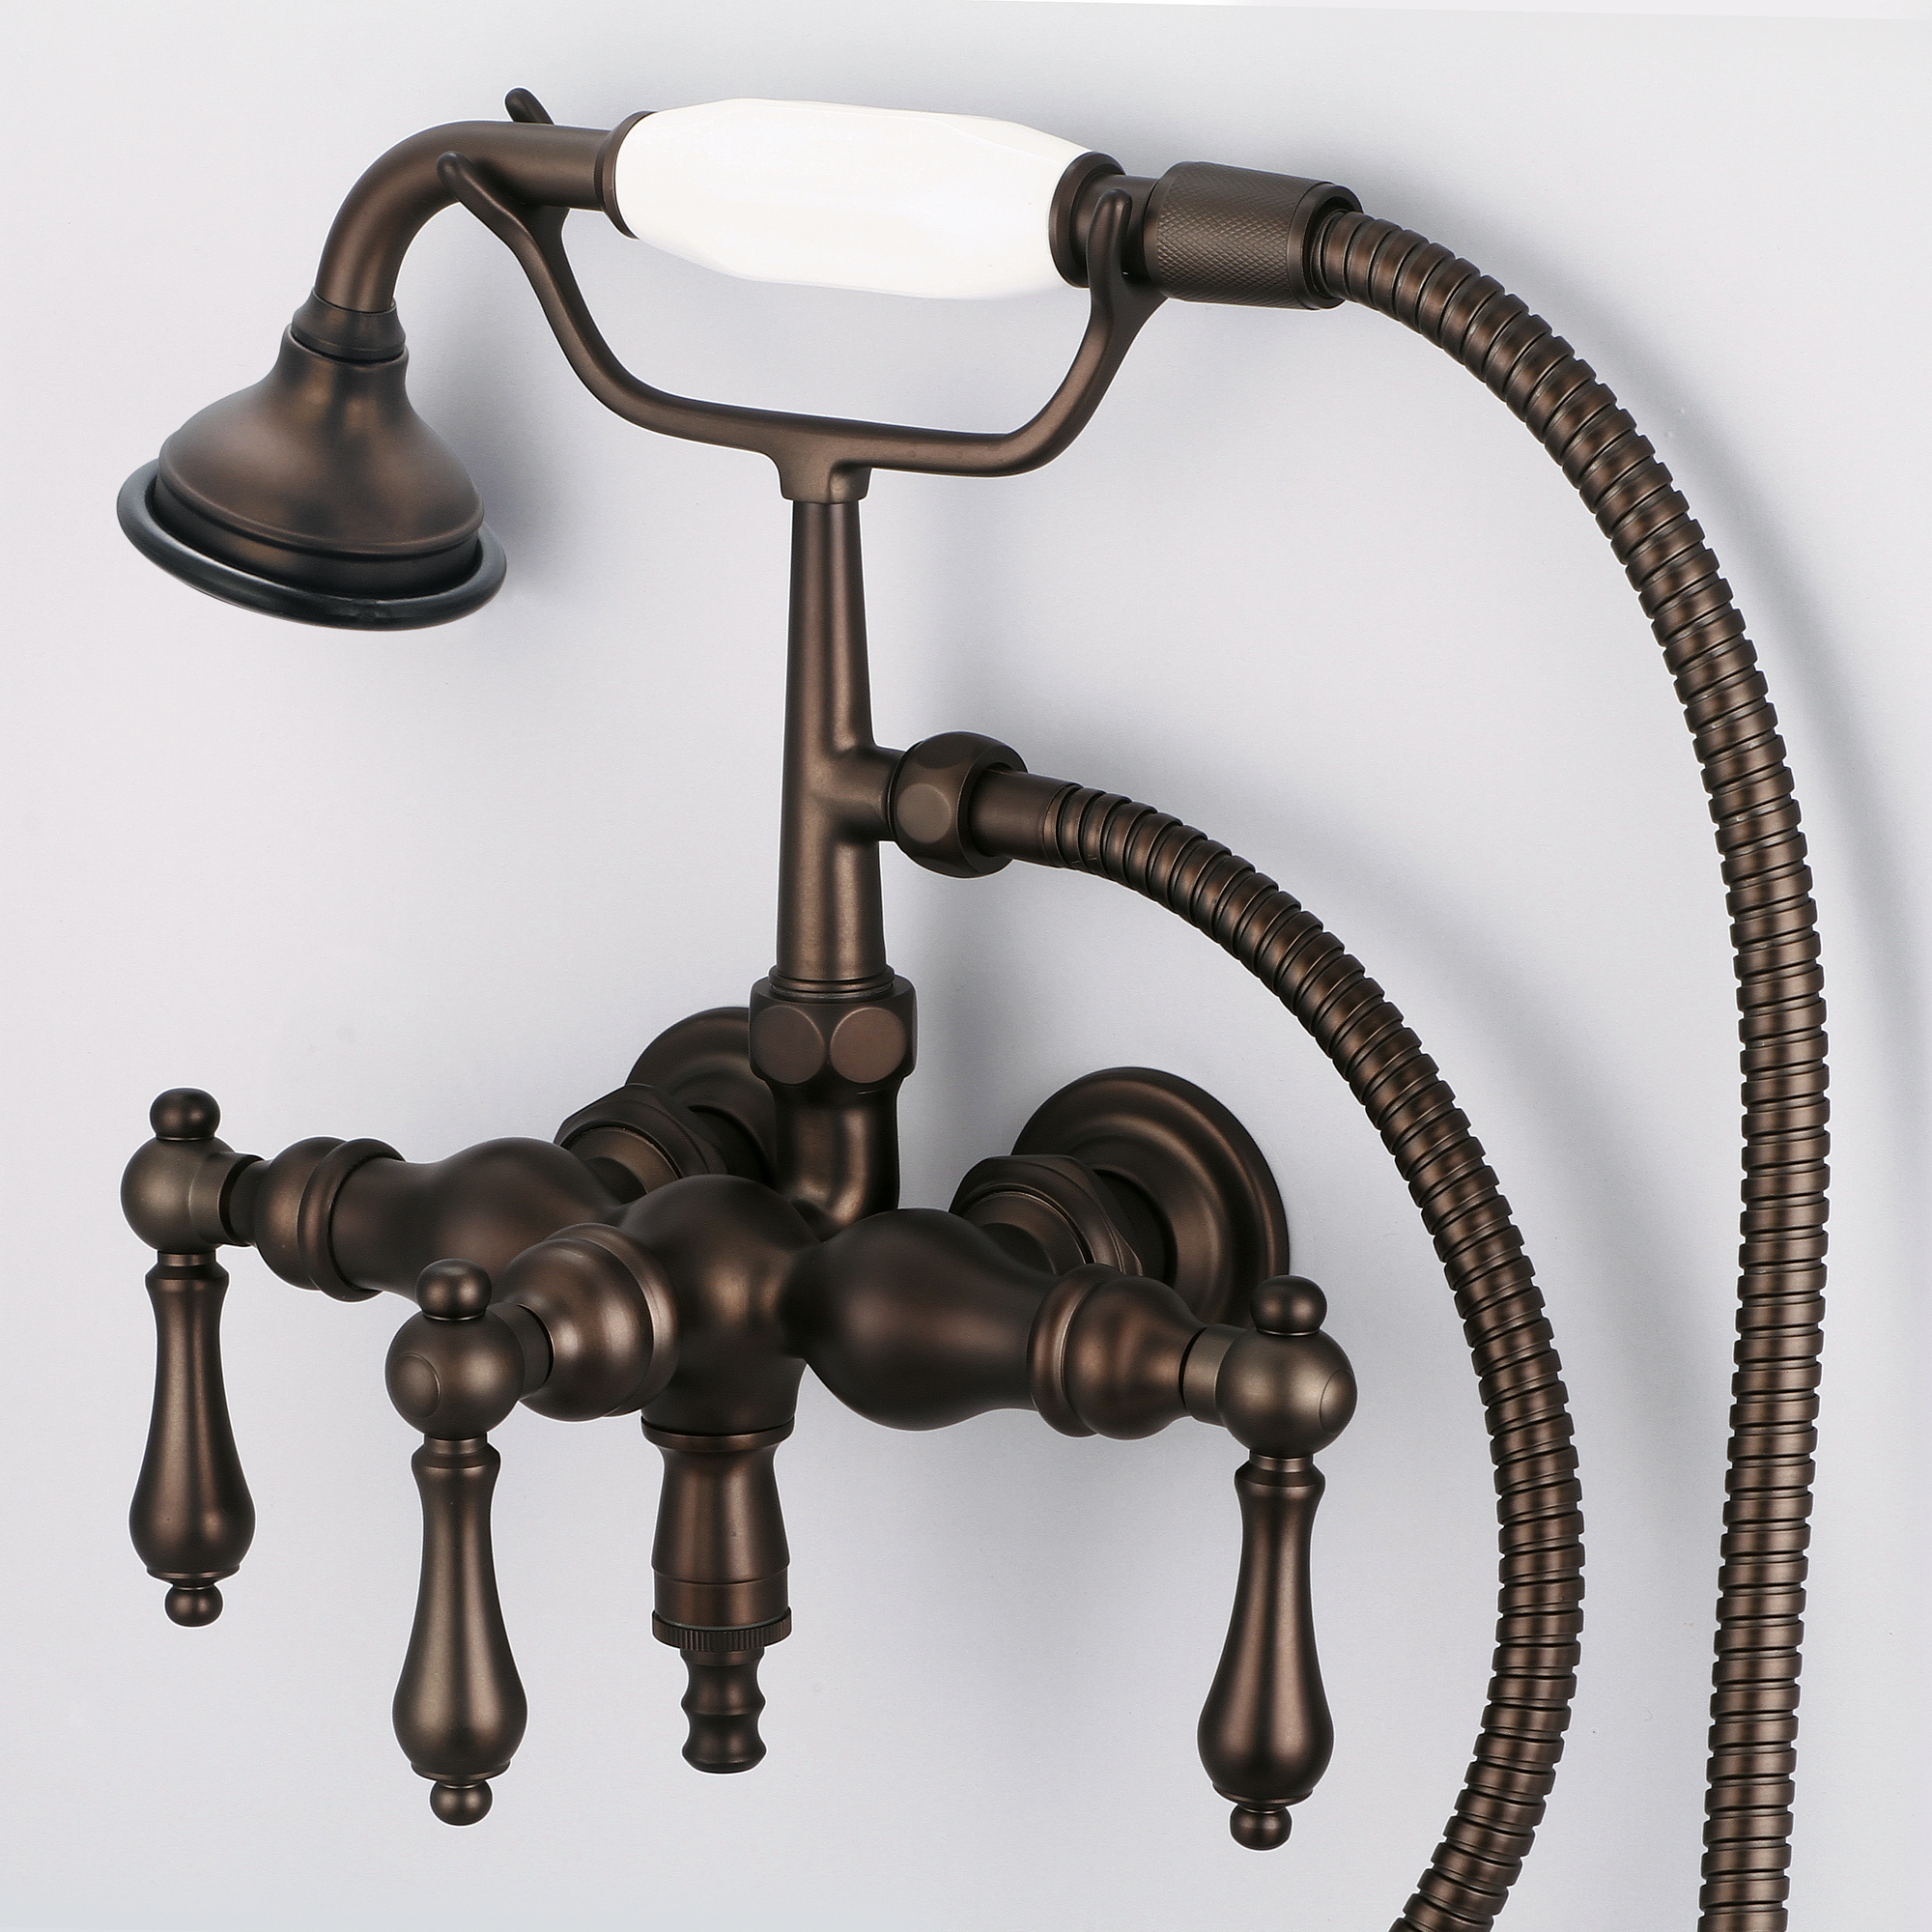 Vintage Classic 3.375 Inch Center Wall Mount Tub Faucet With Down Spout, Straight Wall Connector & Handheld Shower in Oil-rubbed Bronze Finish Finish With Metal Lever Handles Without Labels